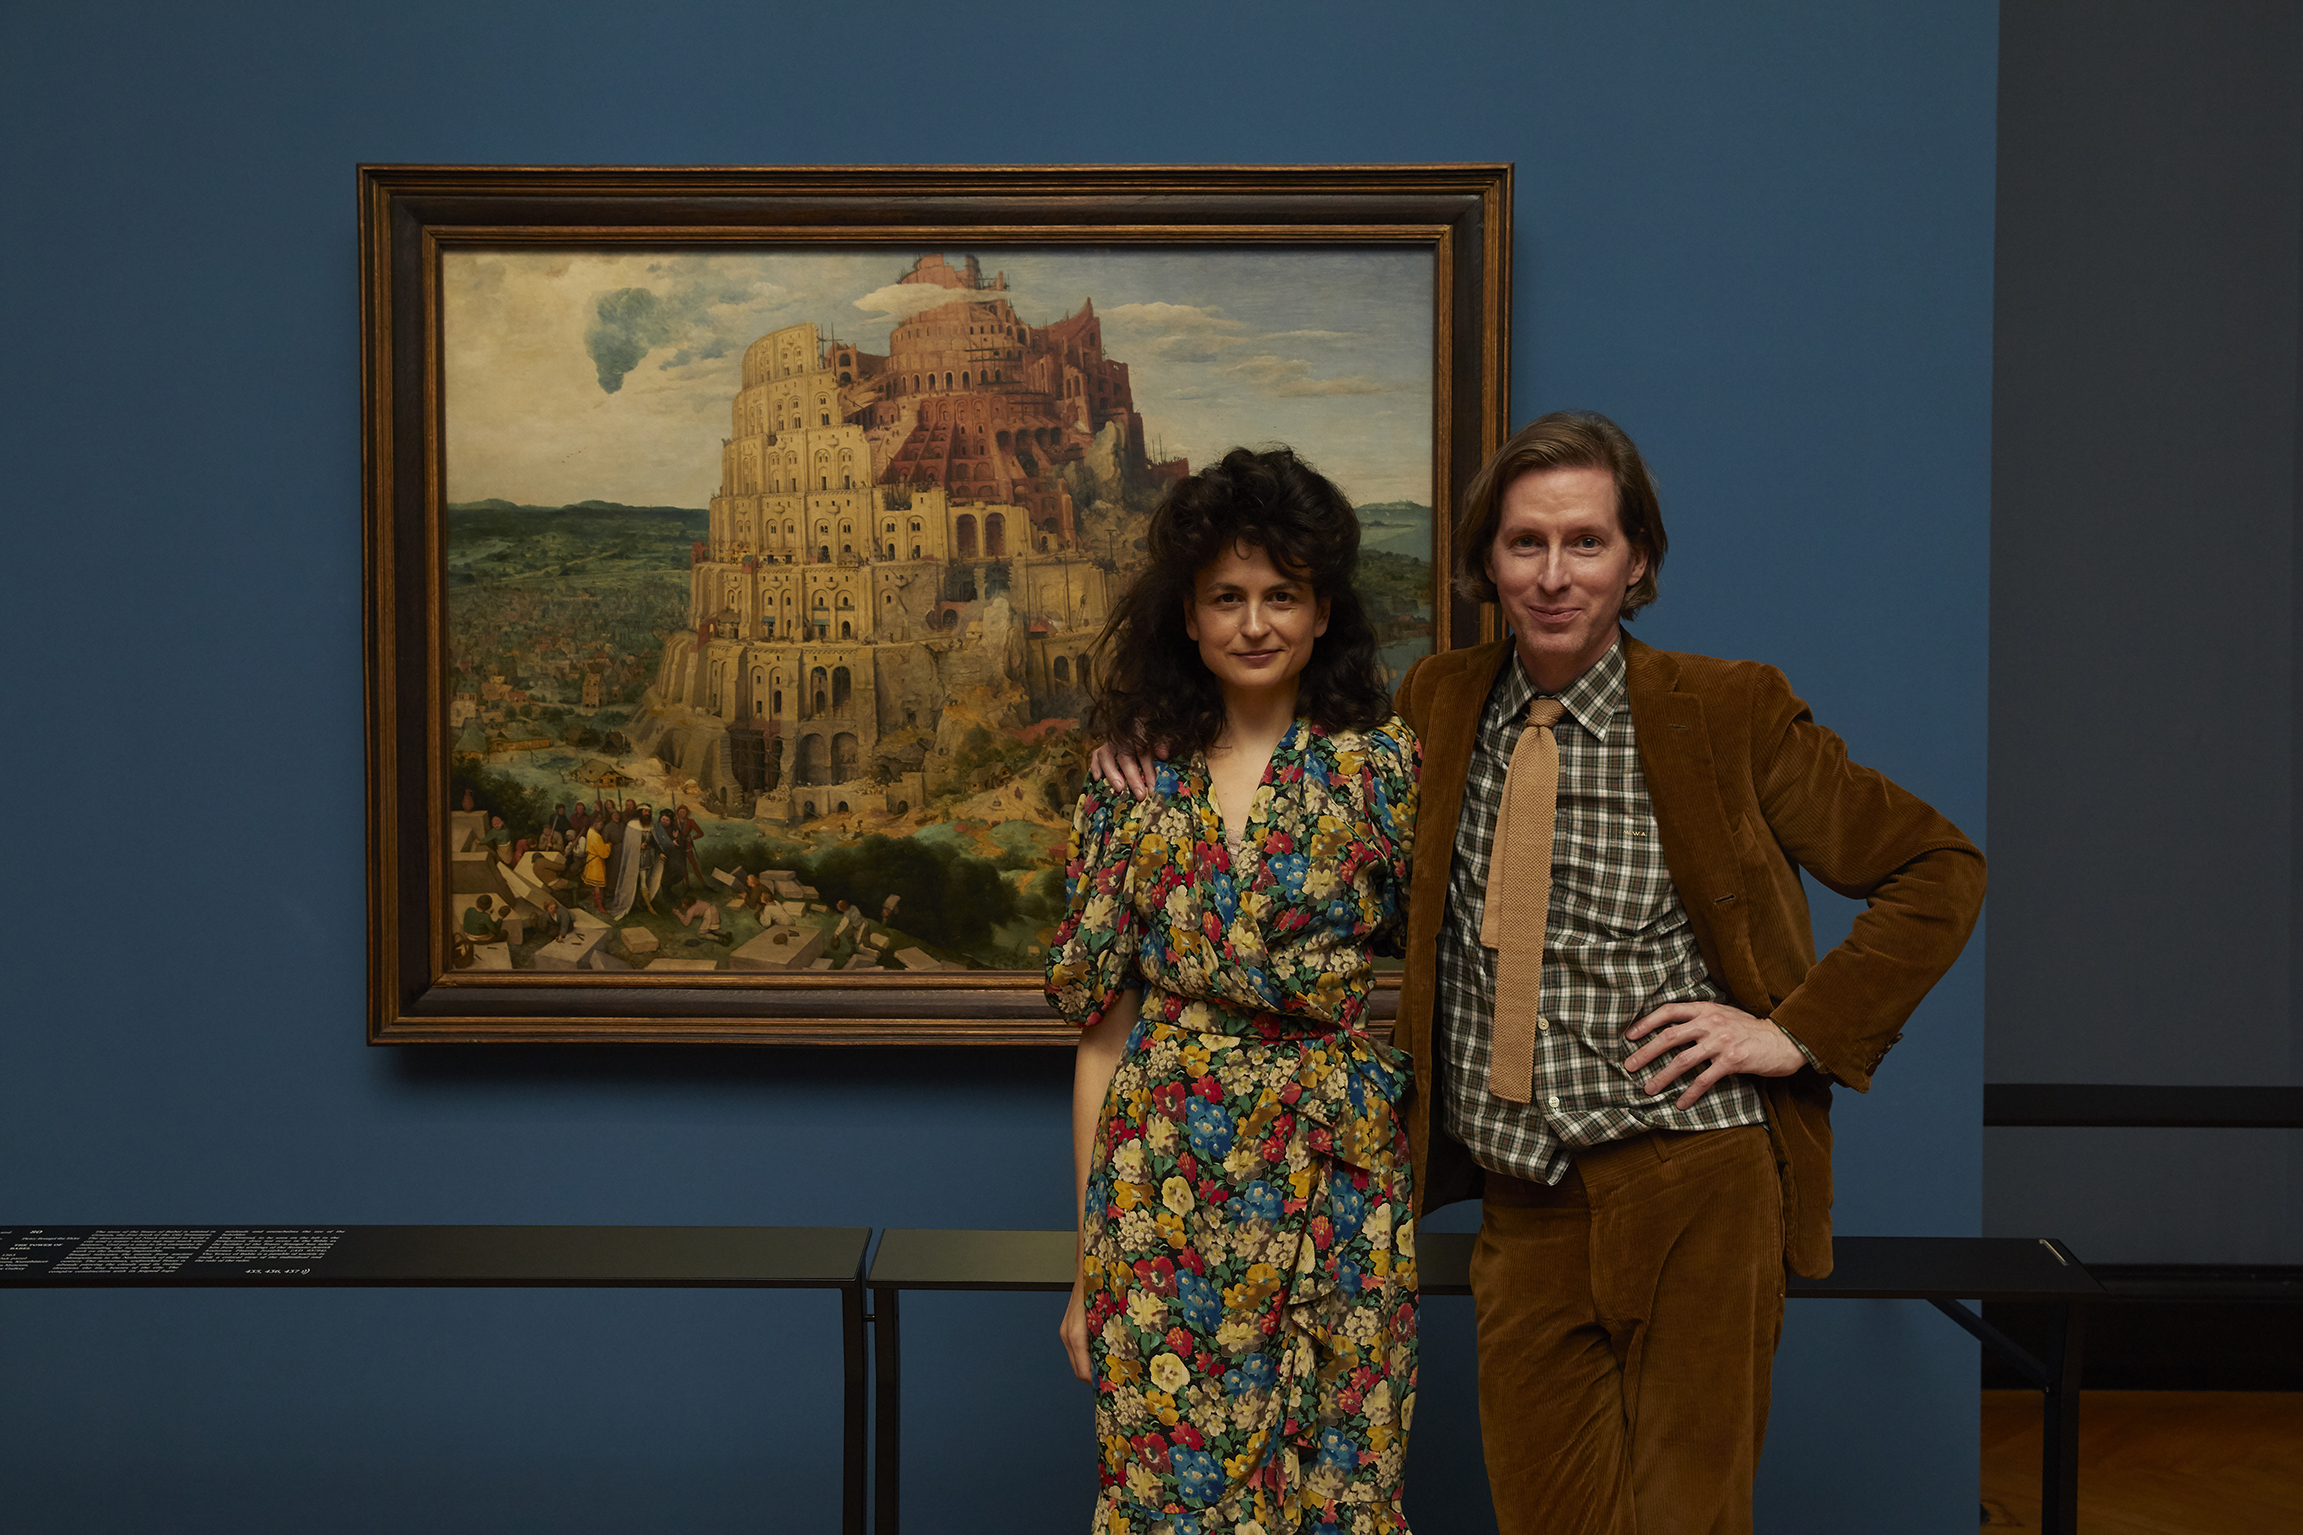 Wes Anderson & Juman Malouf (2.3 MB)In front of "The Tower of Babel" by Pieter Bruegel the